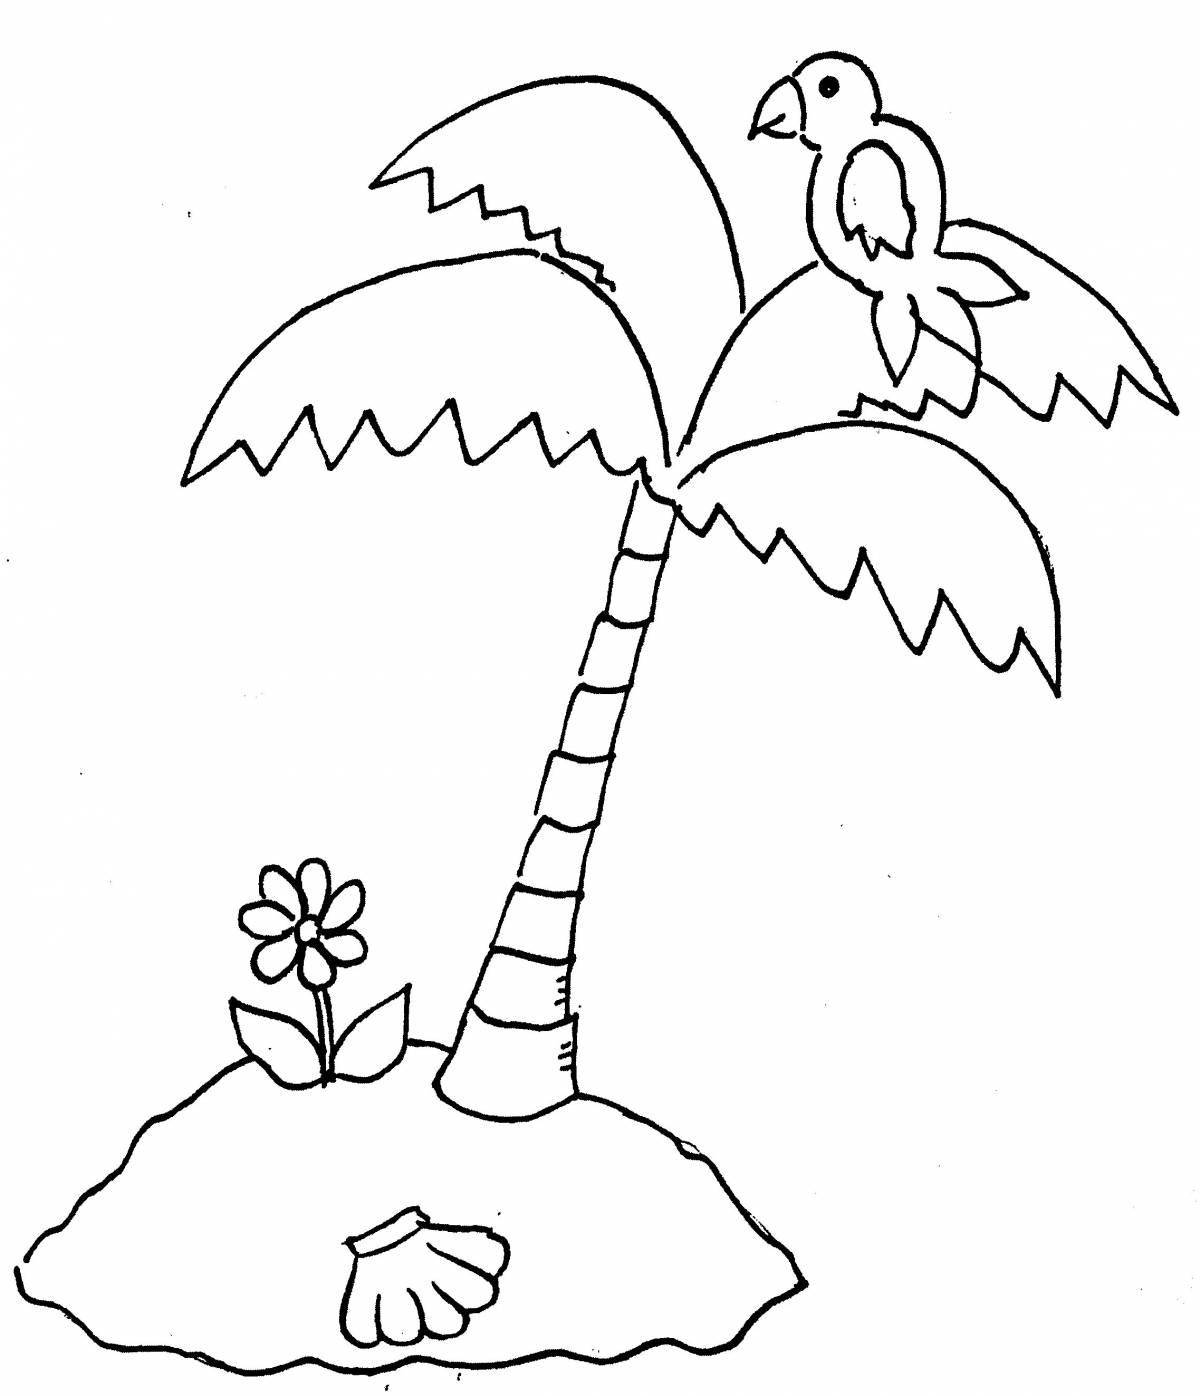 Glorious desert island coloring page